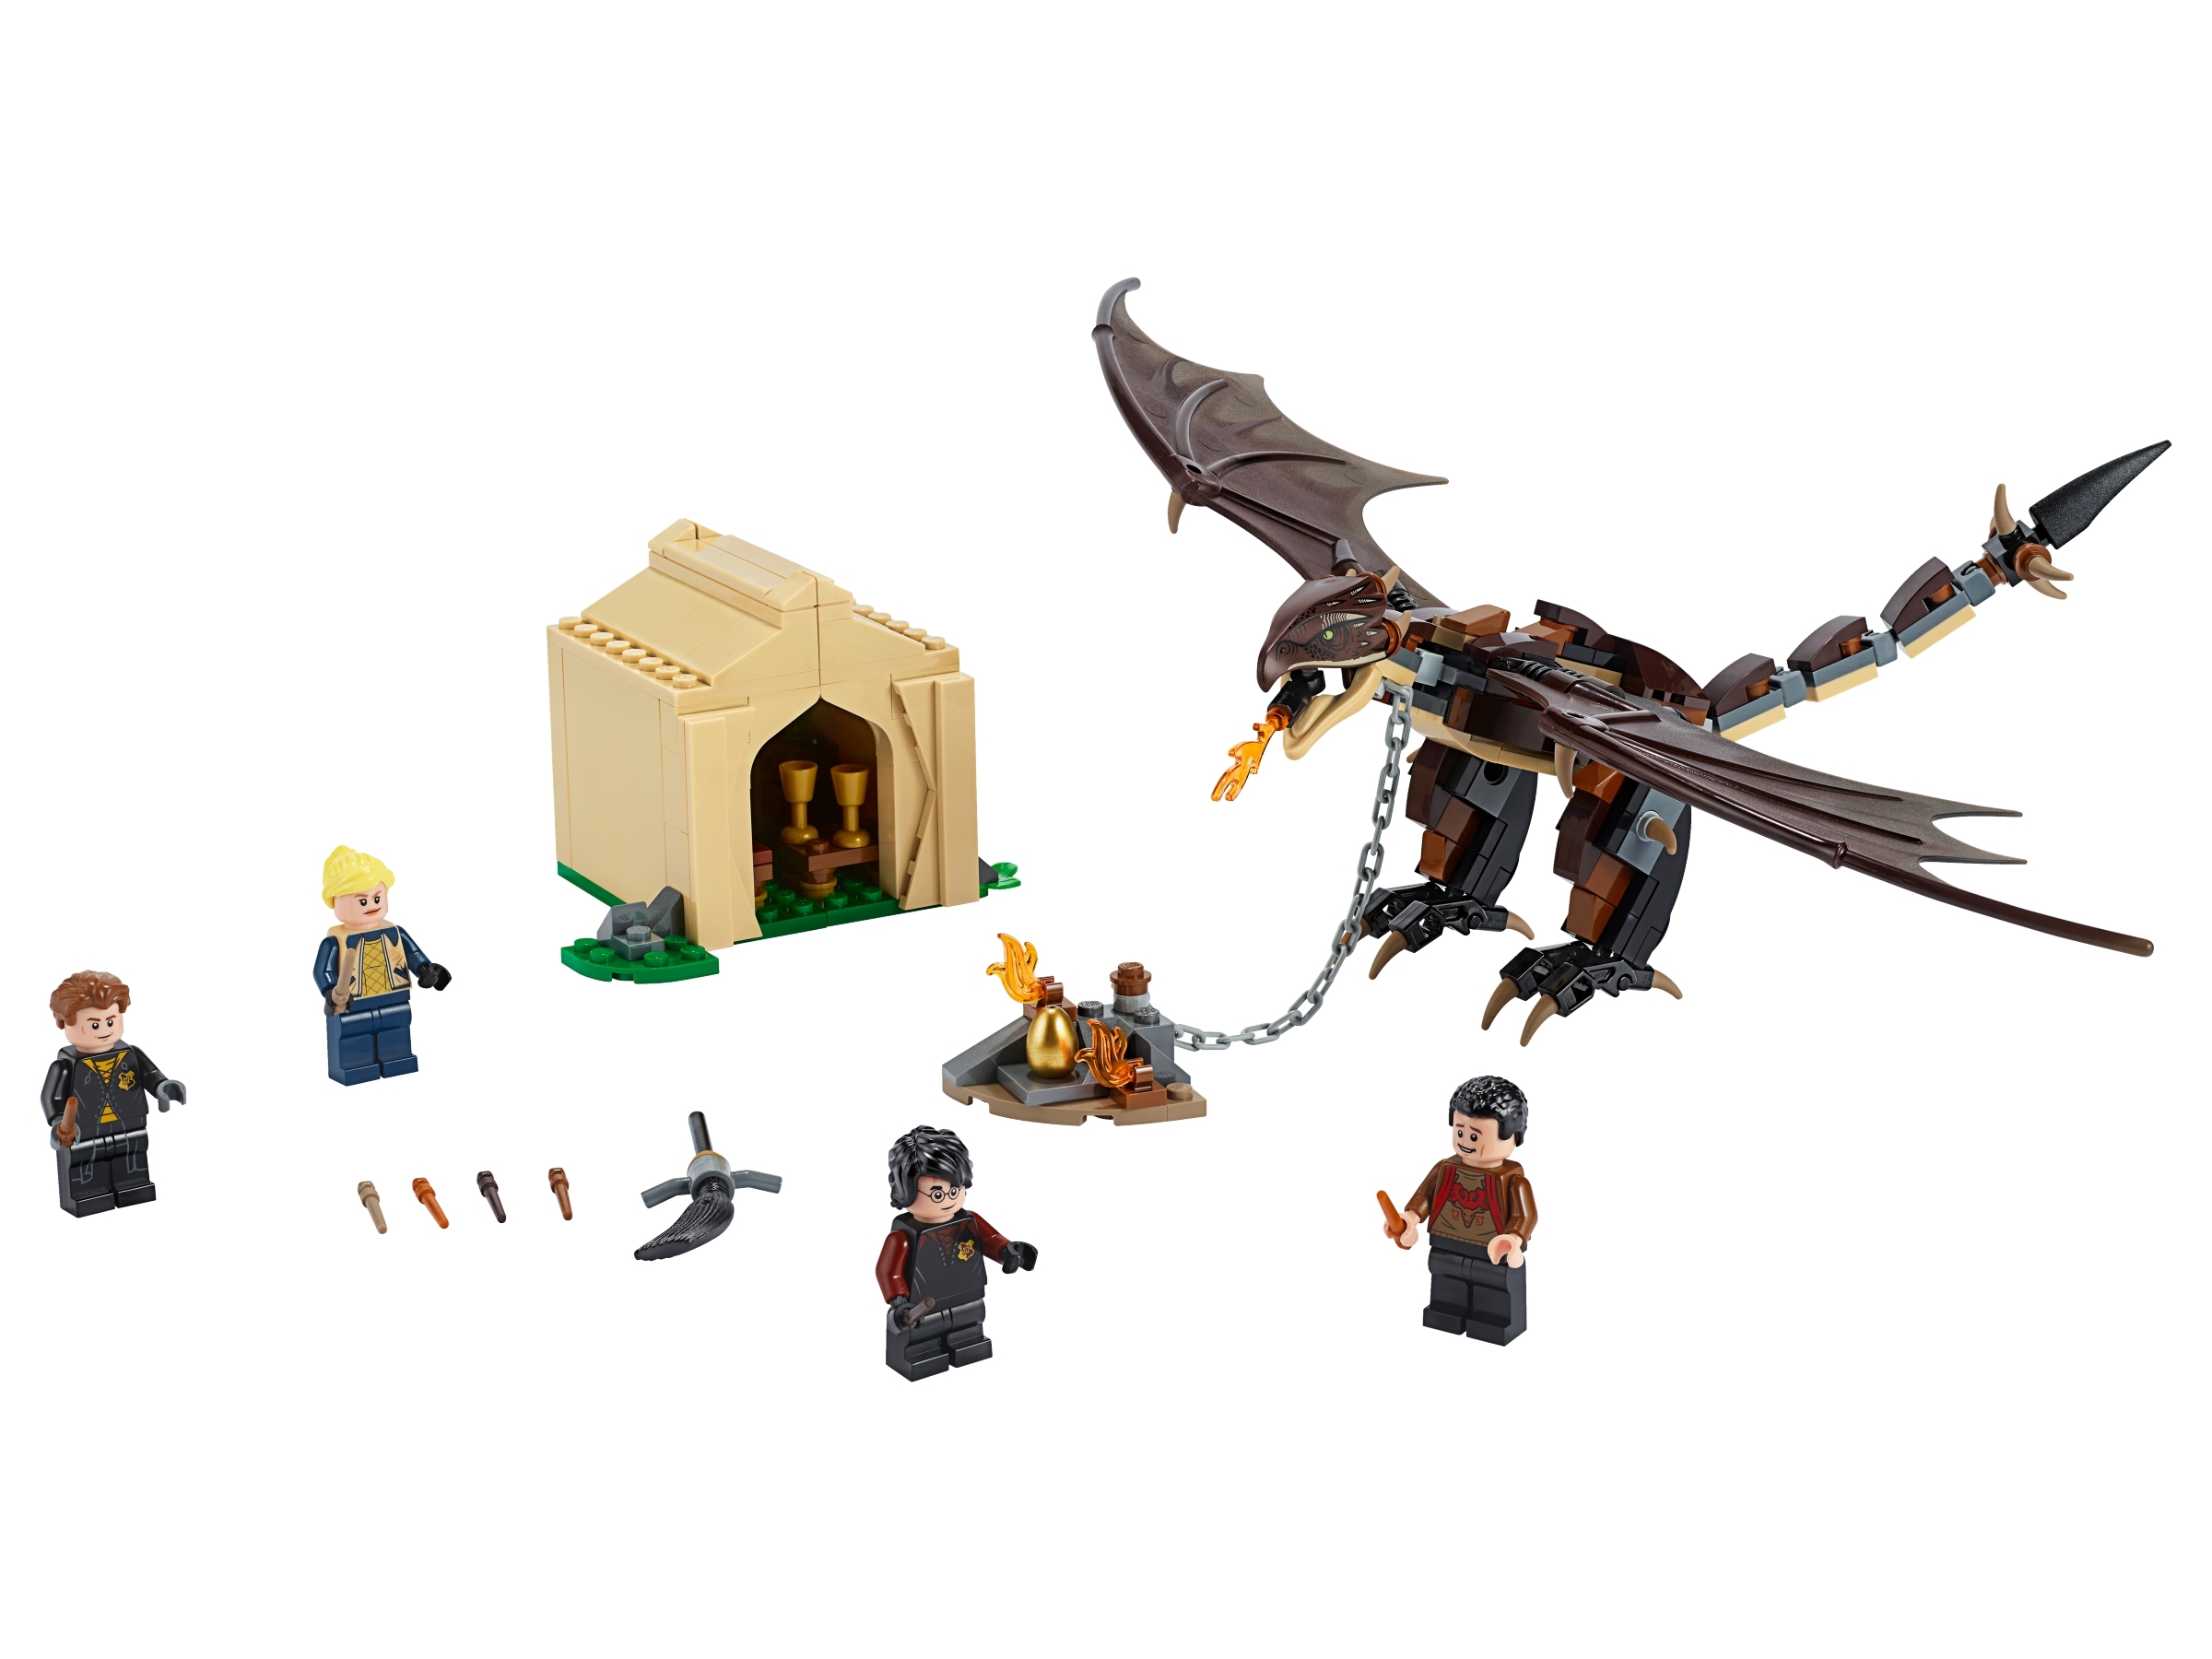 Lego Harry Potter: Years 1-4 – Dragons 100% Guide